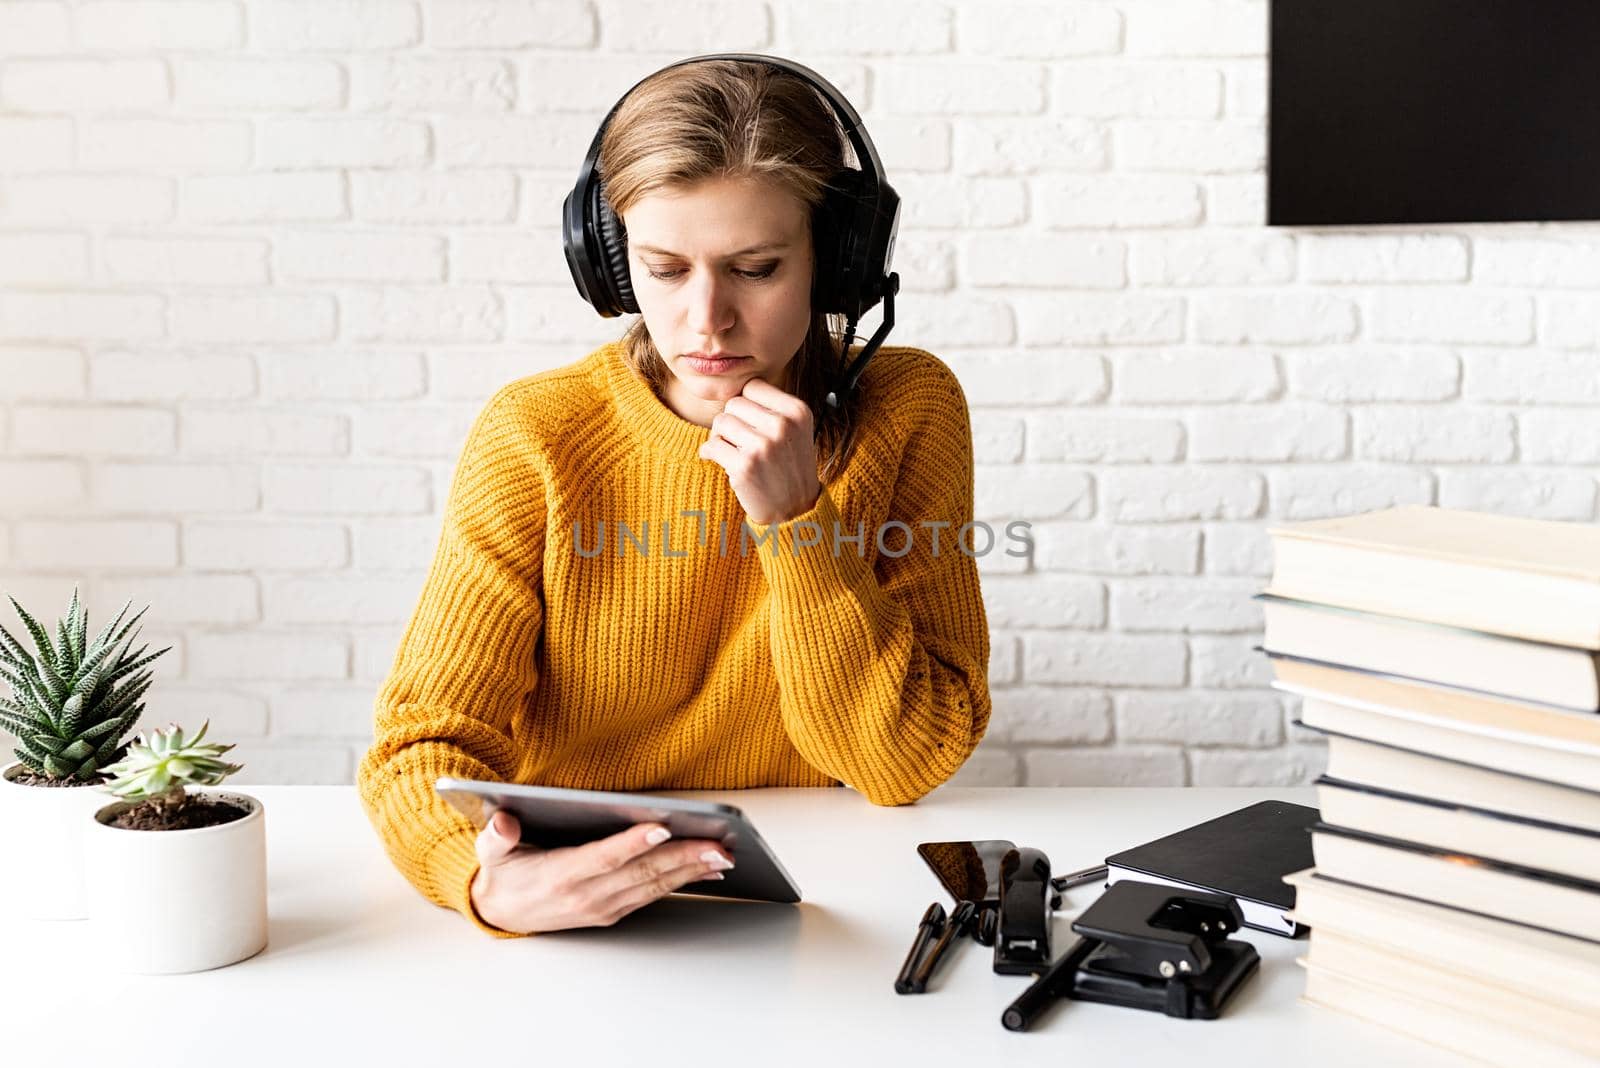 Distance learning. E-learning. Young thoughtful woman in yellow sweater and black headphones studying online using digital tablet